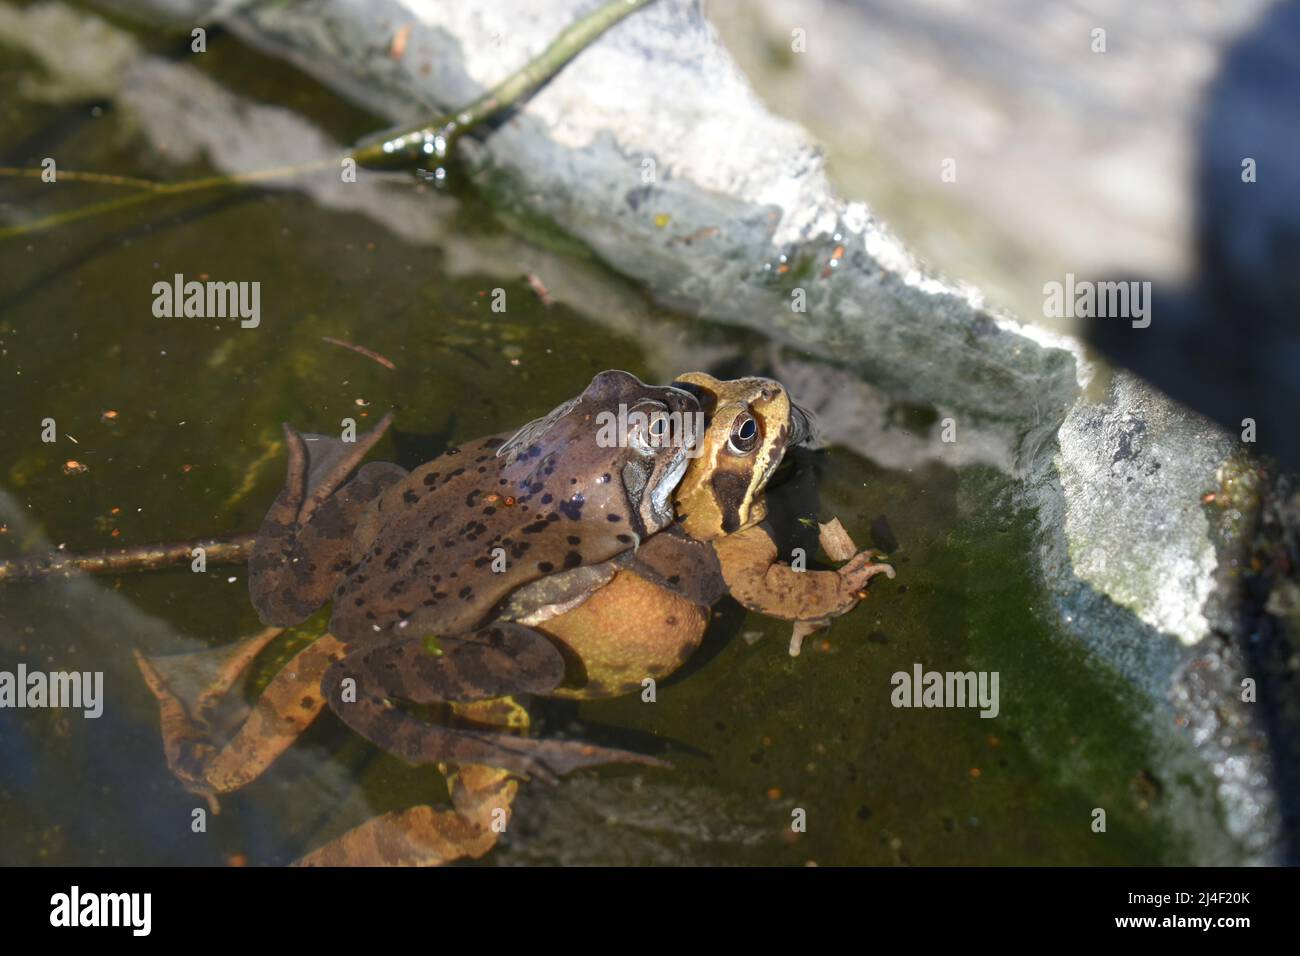 Page 3 - Der Frosch High Resolution Stock Photography and Images - Alamy